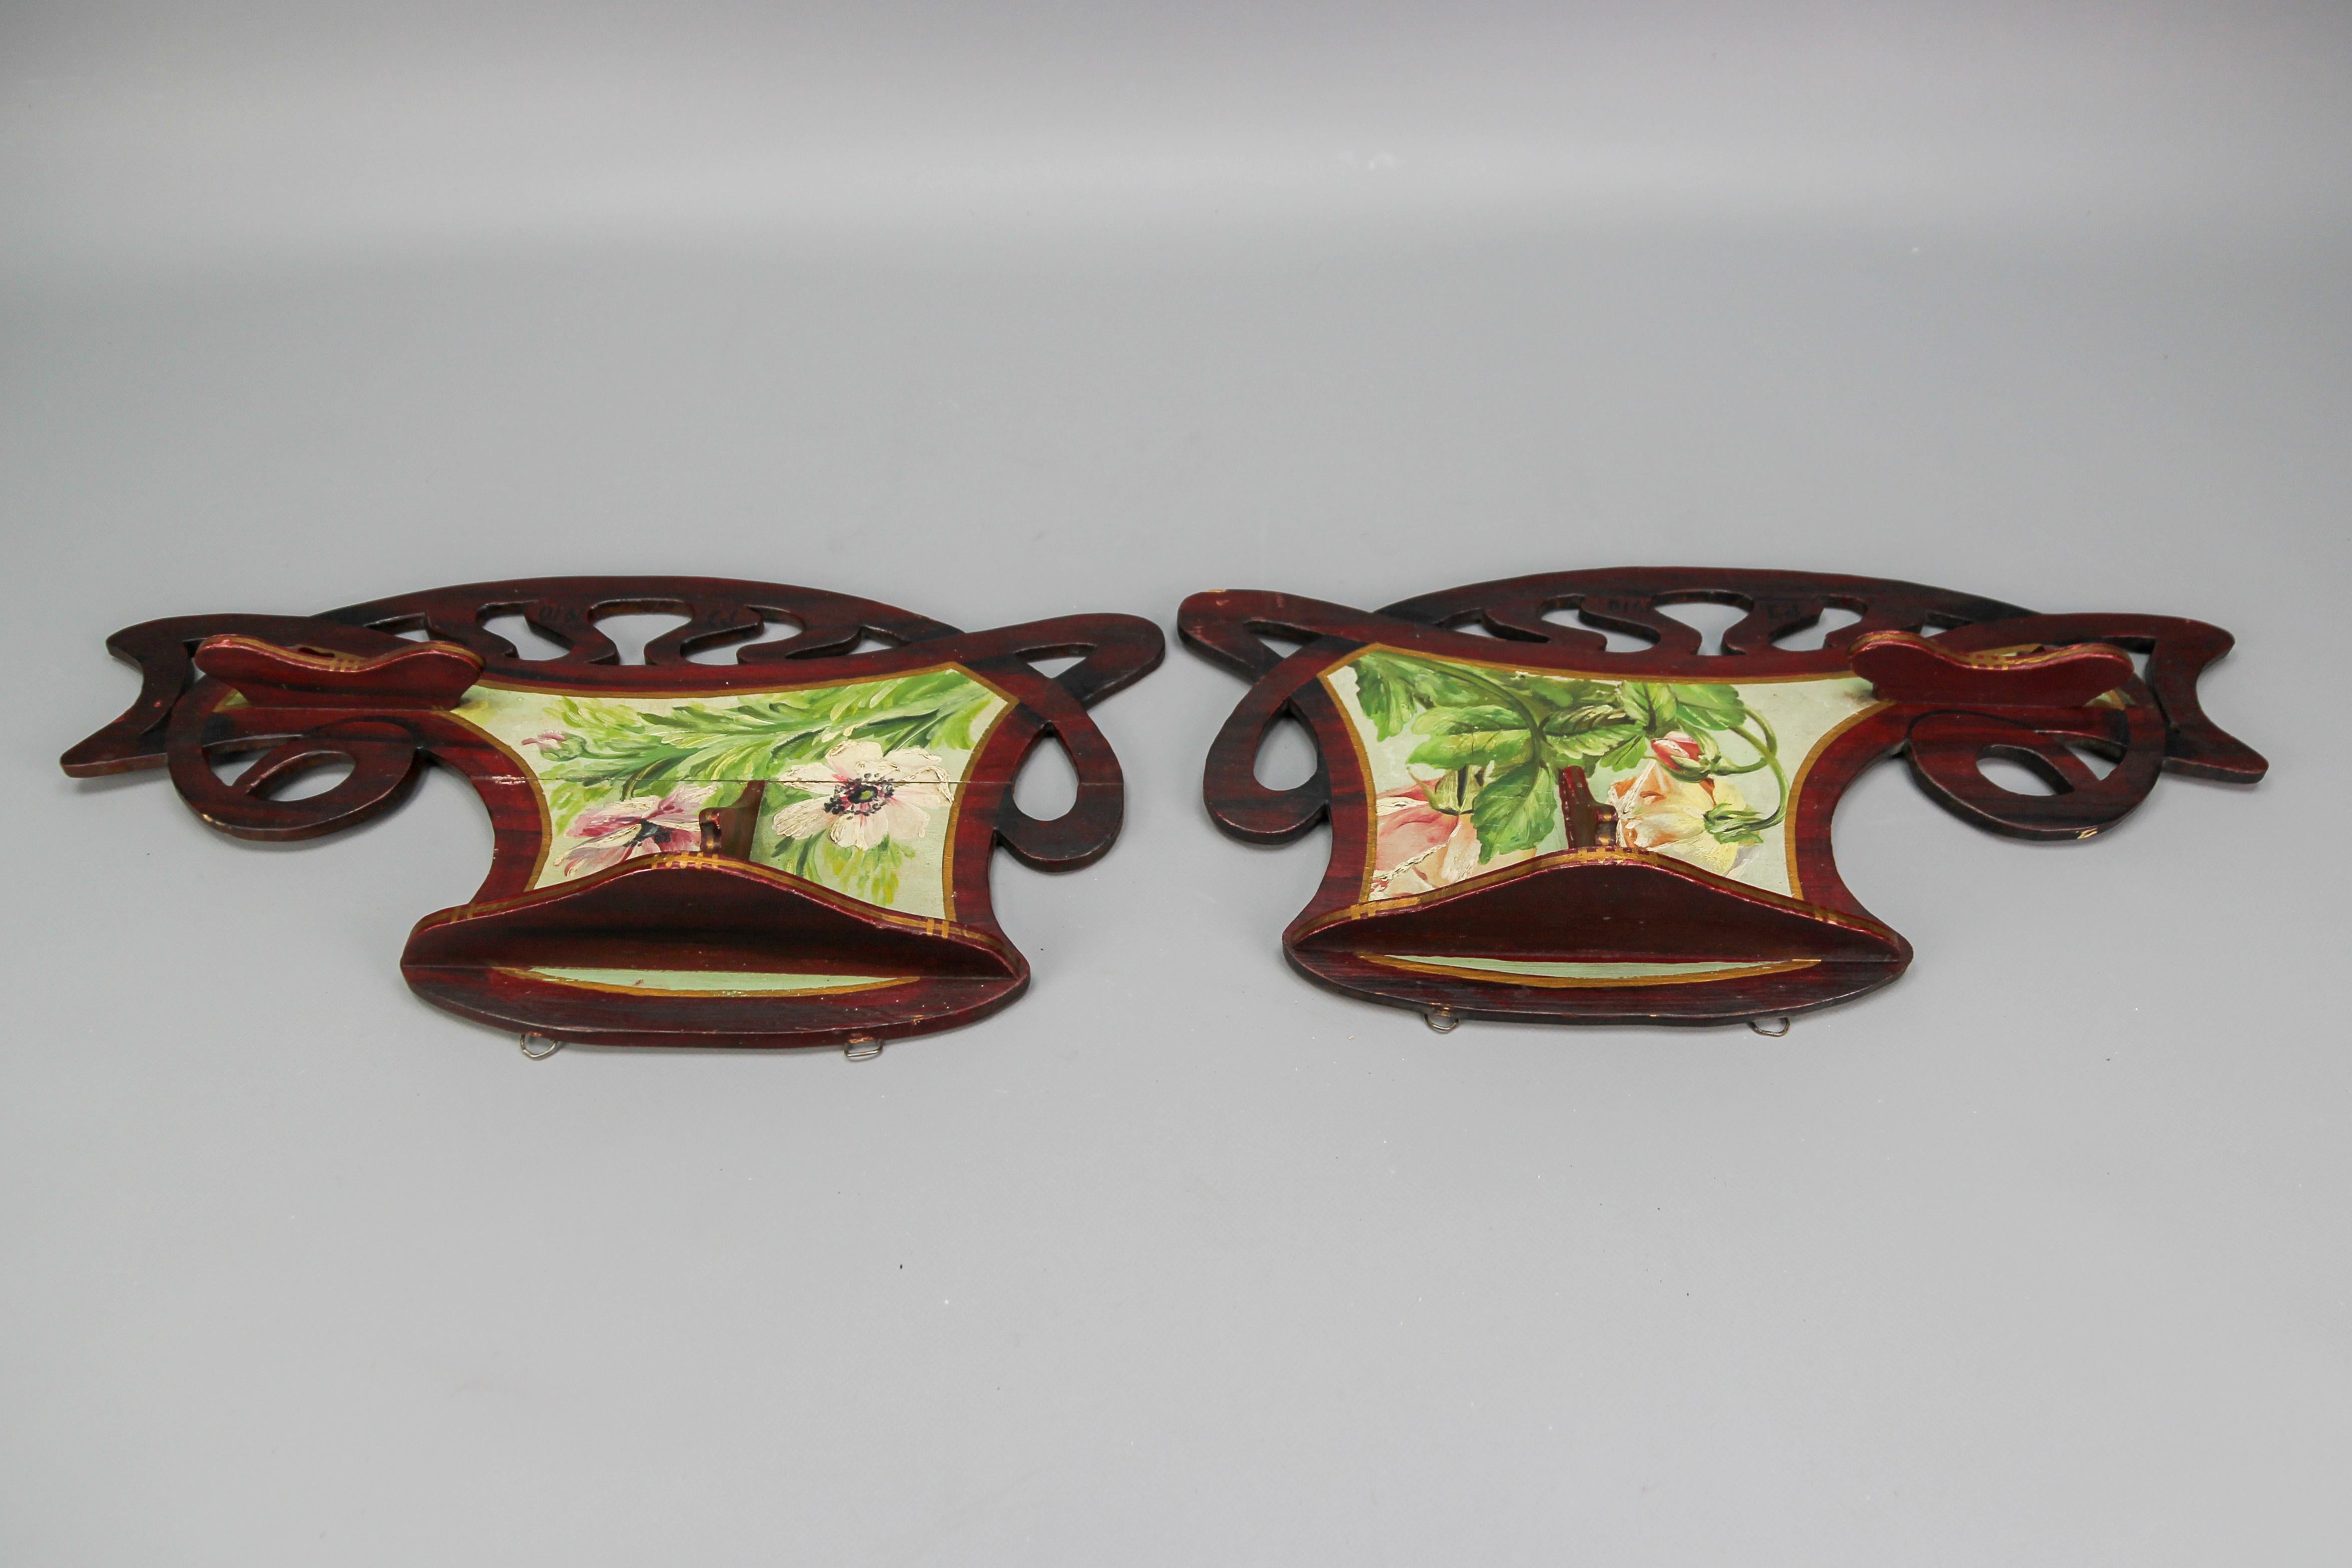 Pair of Art Nouveau Wooden Hand-Painted Floral Shelves, Germany, 1910 For Sale 2